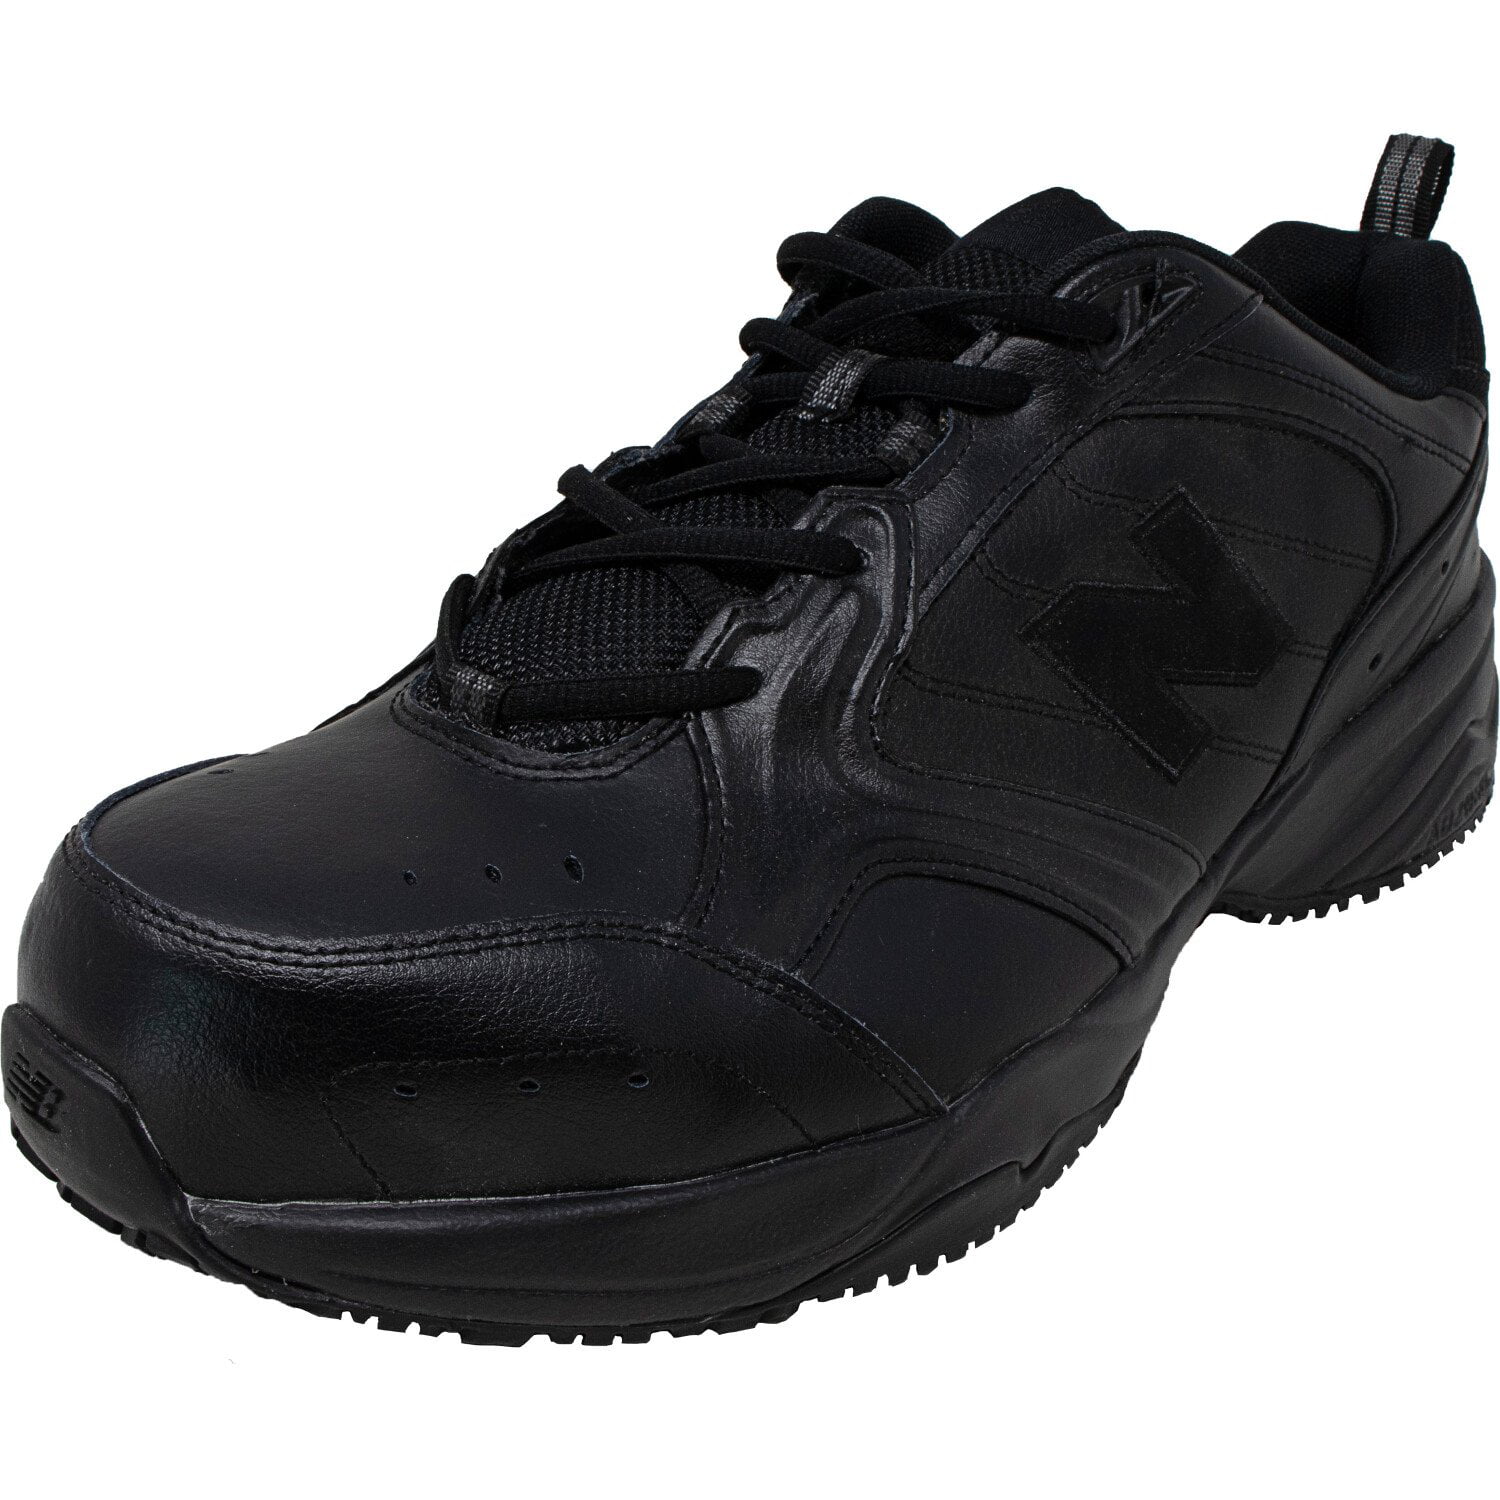 Ankle-High Training Shoes - 10M 